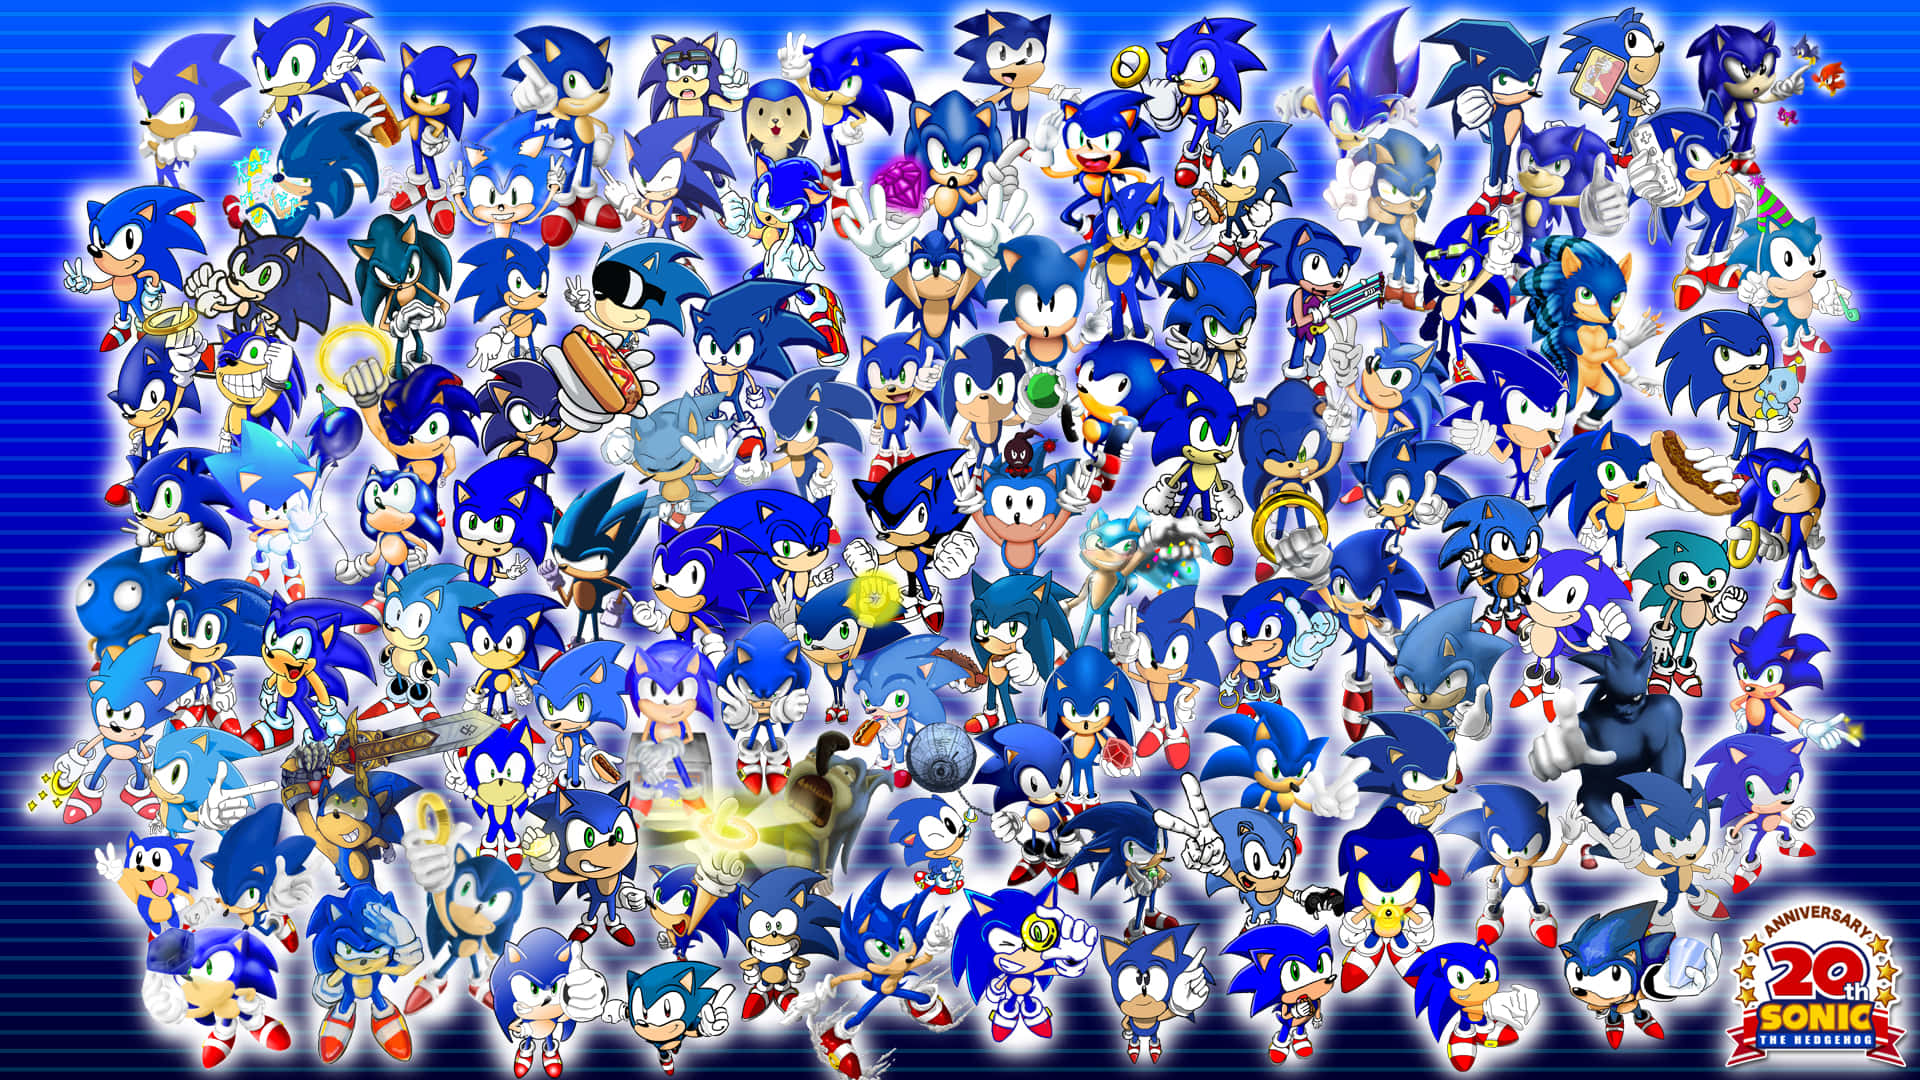 Sonic Fan Art - Featuring Sonic, Tails, and Knuckles Wallpaper